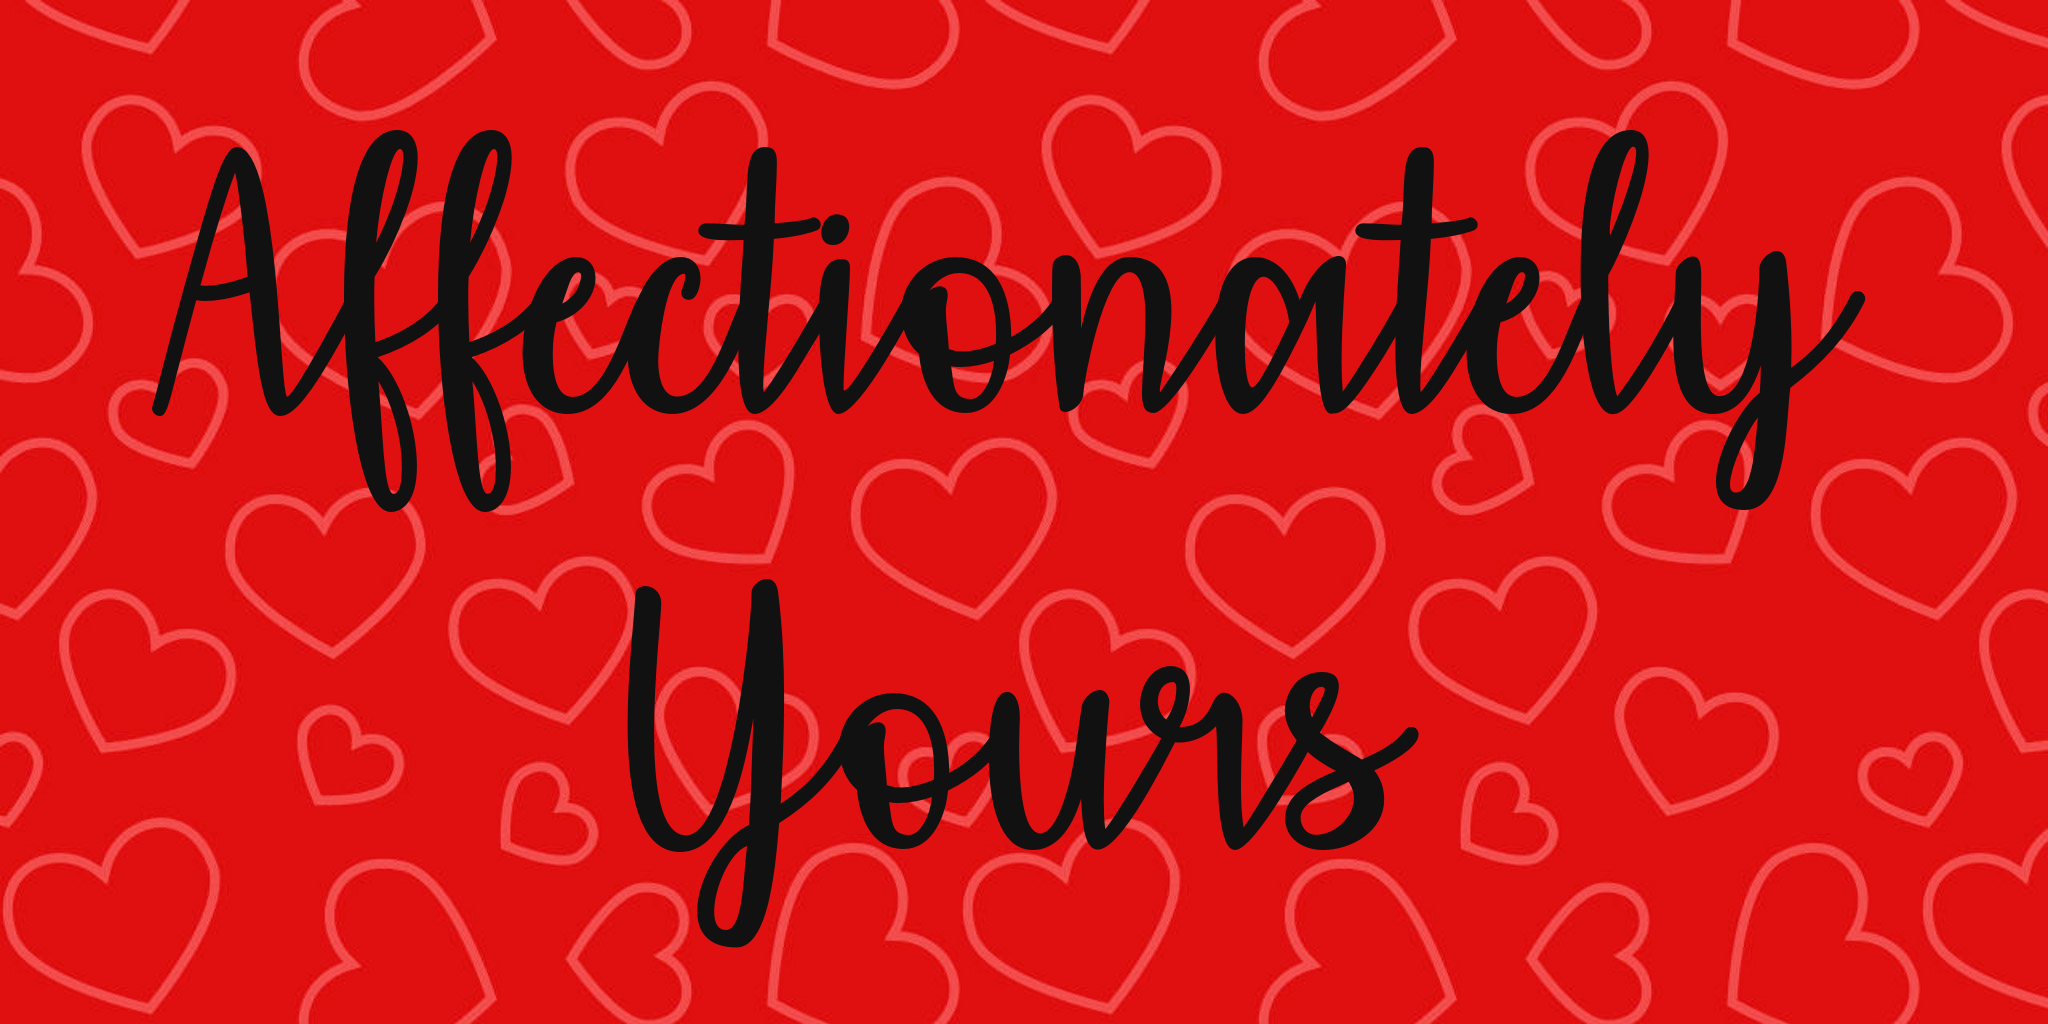 Affectionately Yours